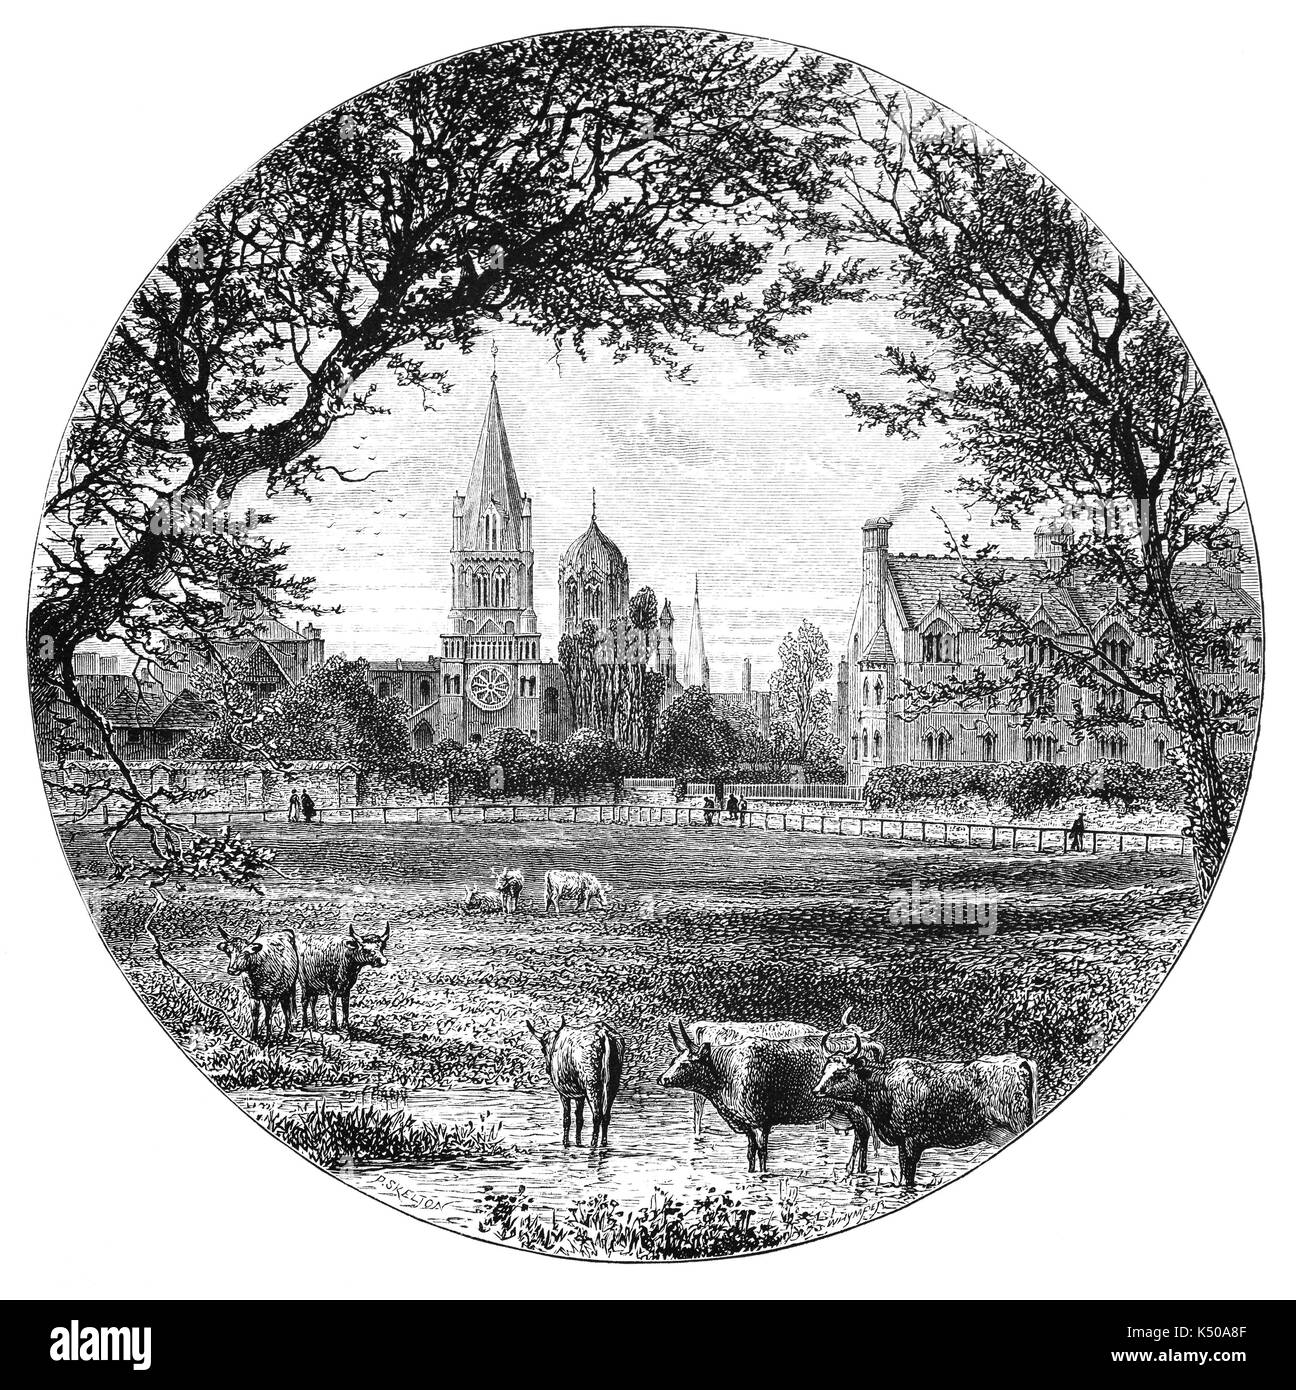 1870: Christ Church from Merton Meadows. Sometimes known as 'The House' it is a constituent college of the University of Oxford. Founded in 1546 by King Henry VIII, it is one of the larger colleges of the University of Oxford, England. Stock Photo